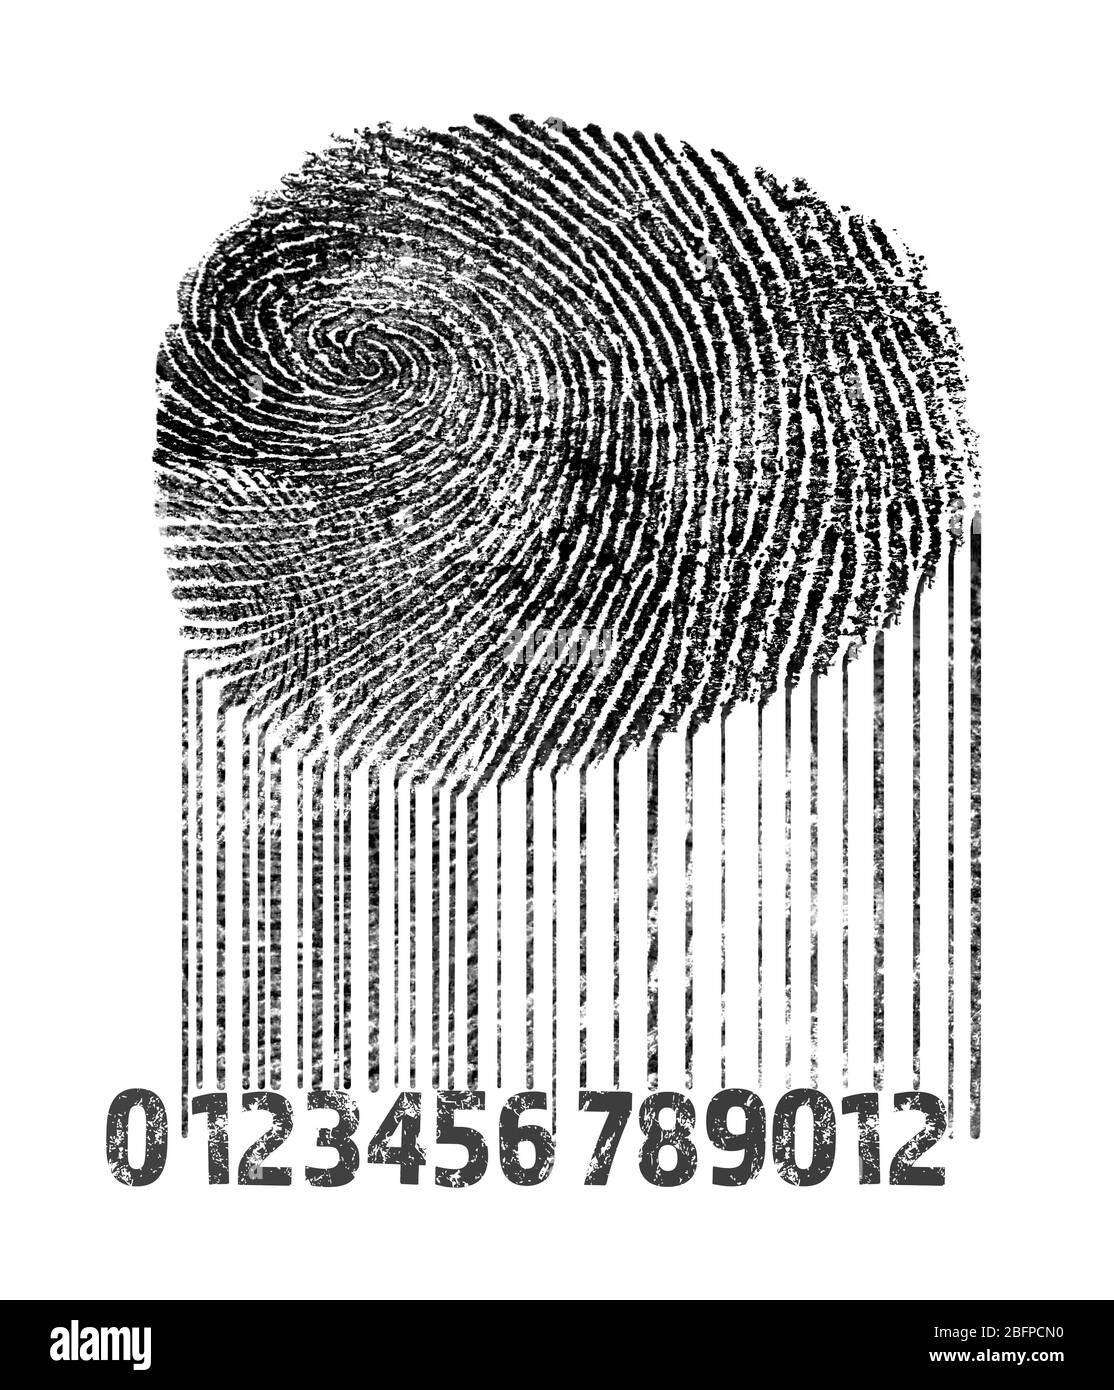 Fingerprint and bar code on white background. Individuality concept. Stock Photo